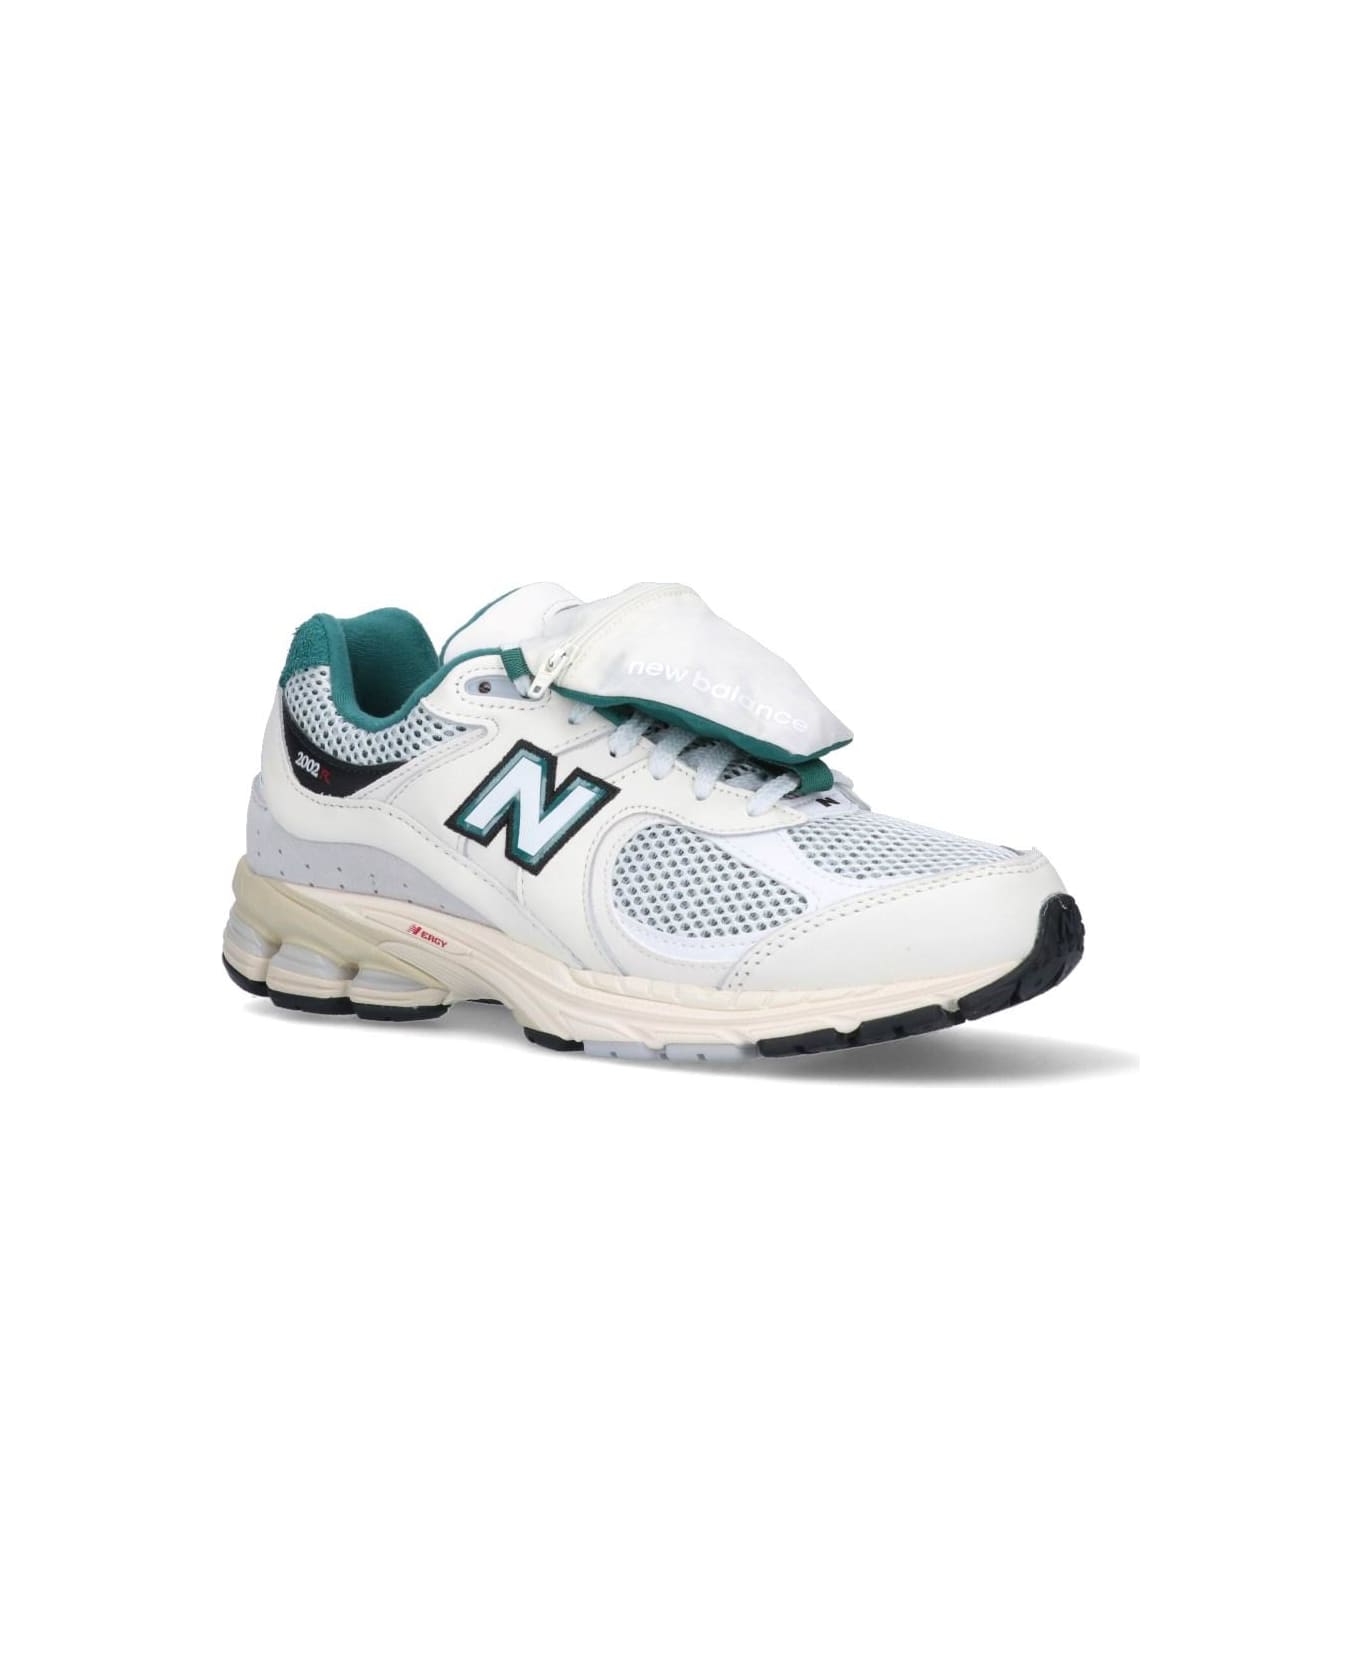 New Balance Sneakers '2002r Nightwatch Green' - White